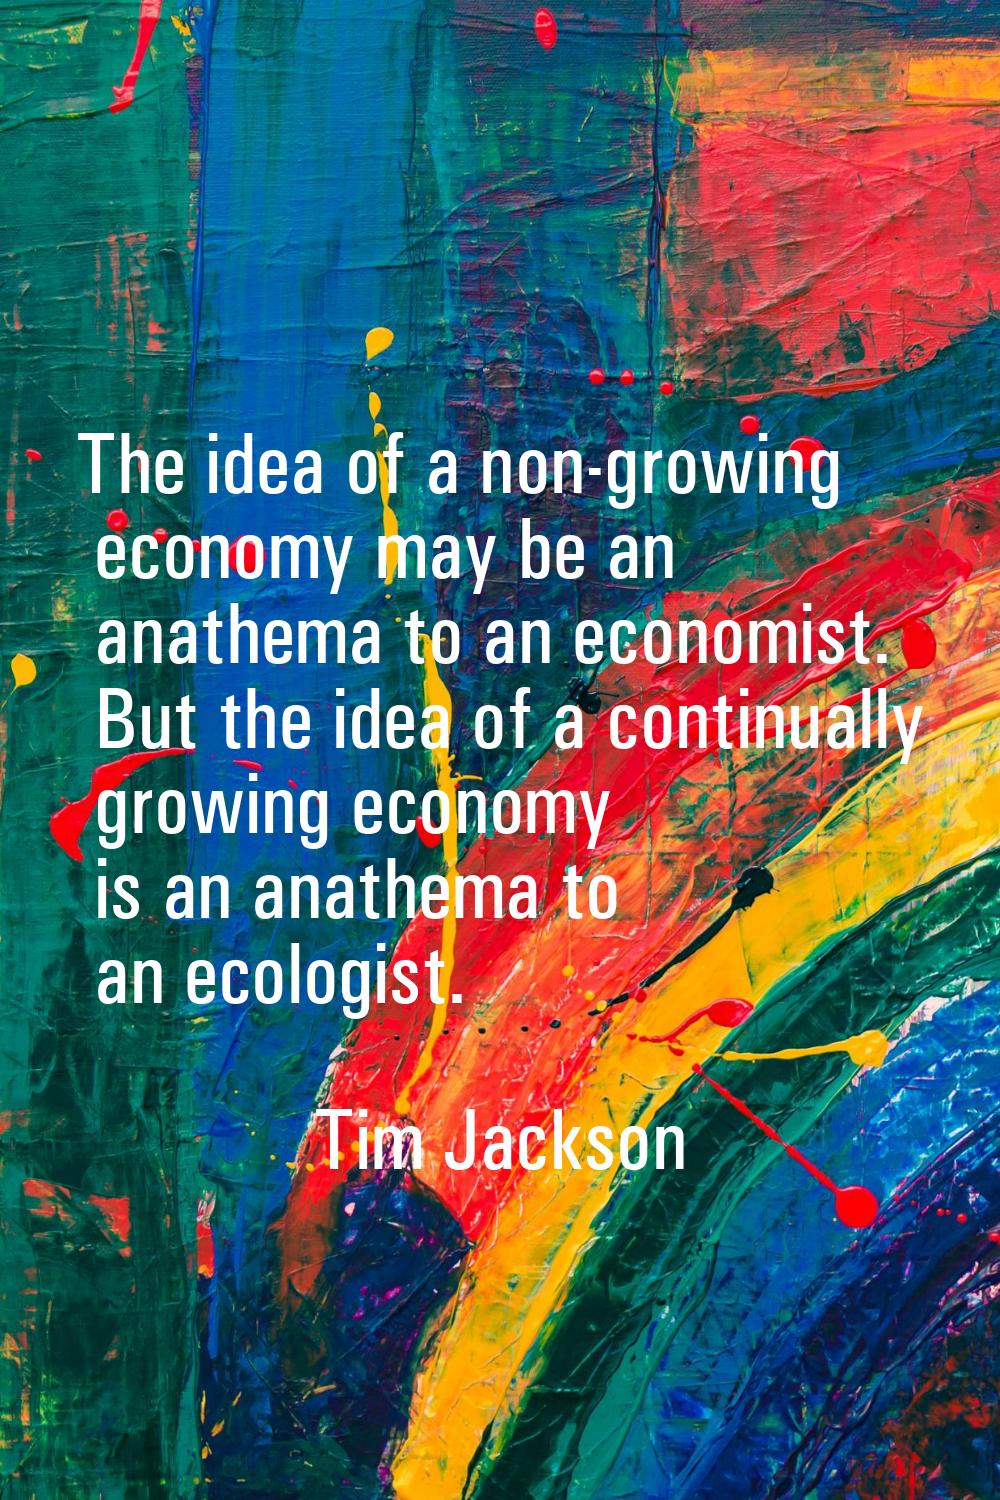 The idea of a non-growing economy may be an anathema to an economist. But the idea of a continually